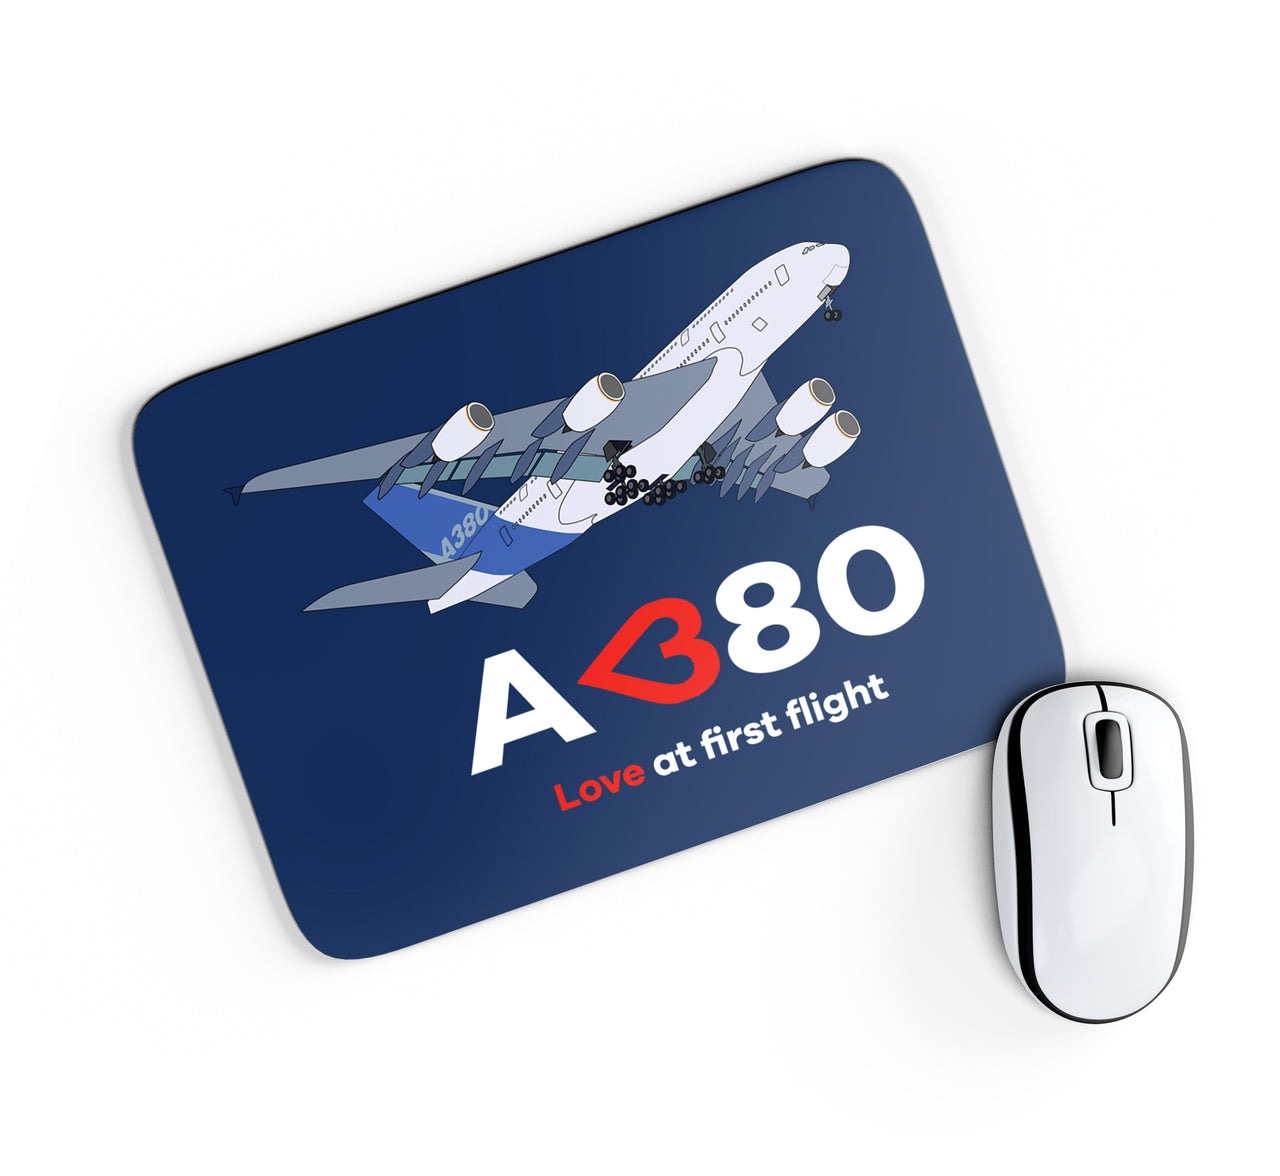 Airbus A380 Love at first flight Designed Mouse Pads